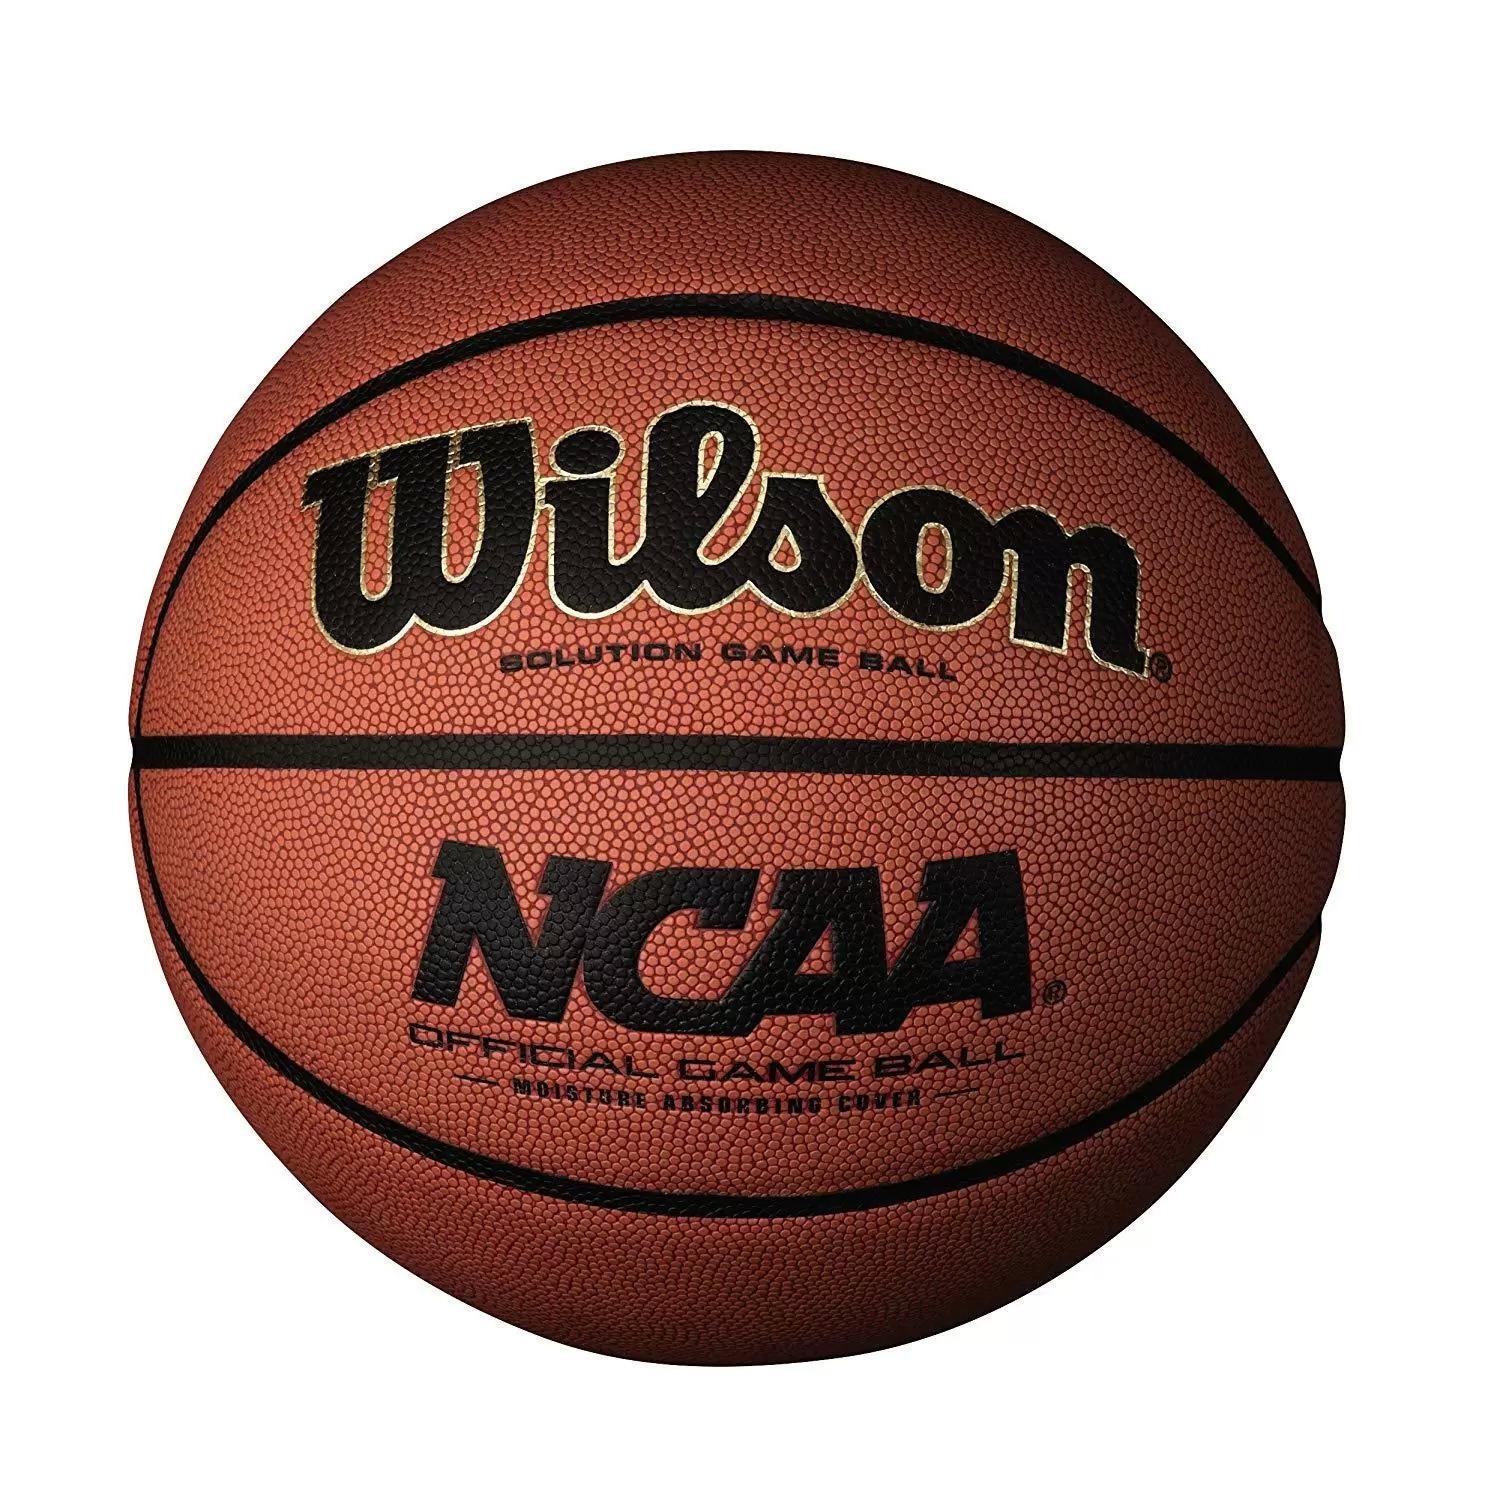 Wilson NCAA Official Game 29.5in Basketball for $10